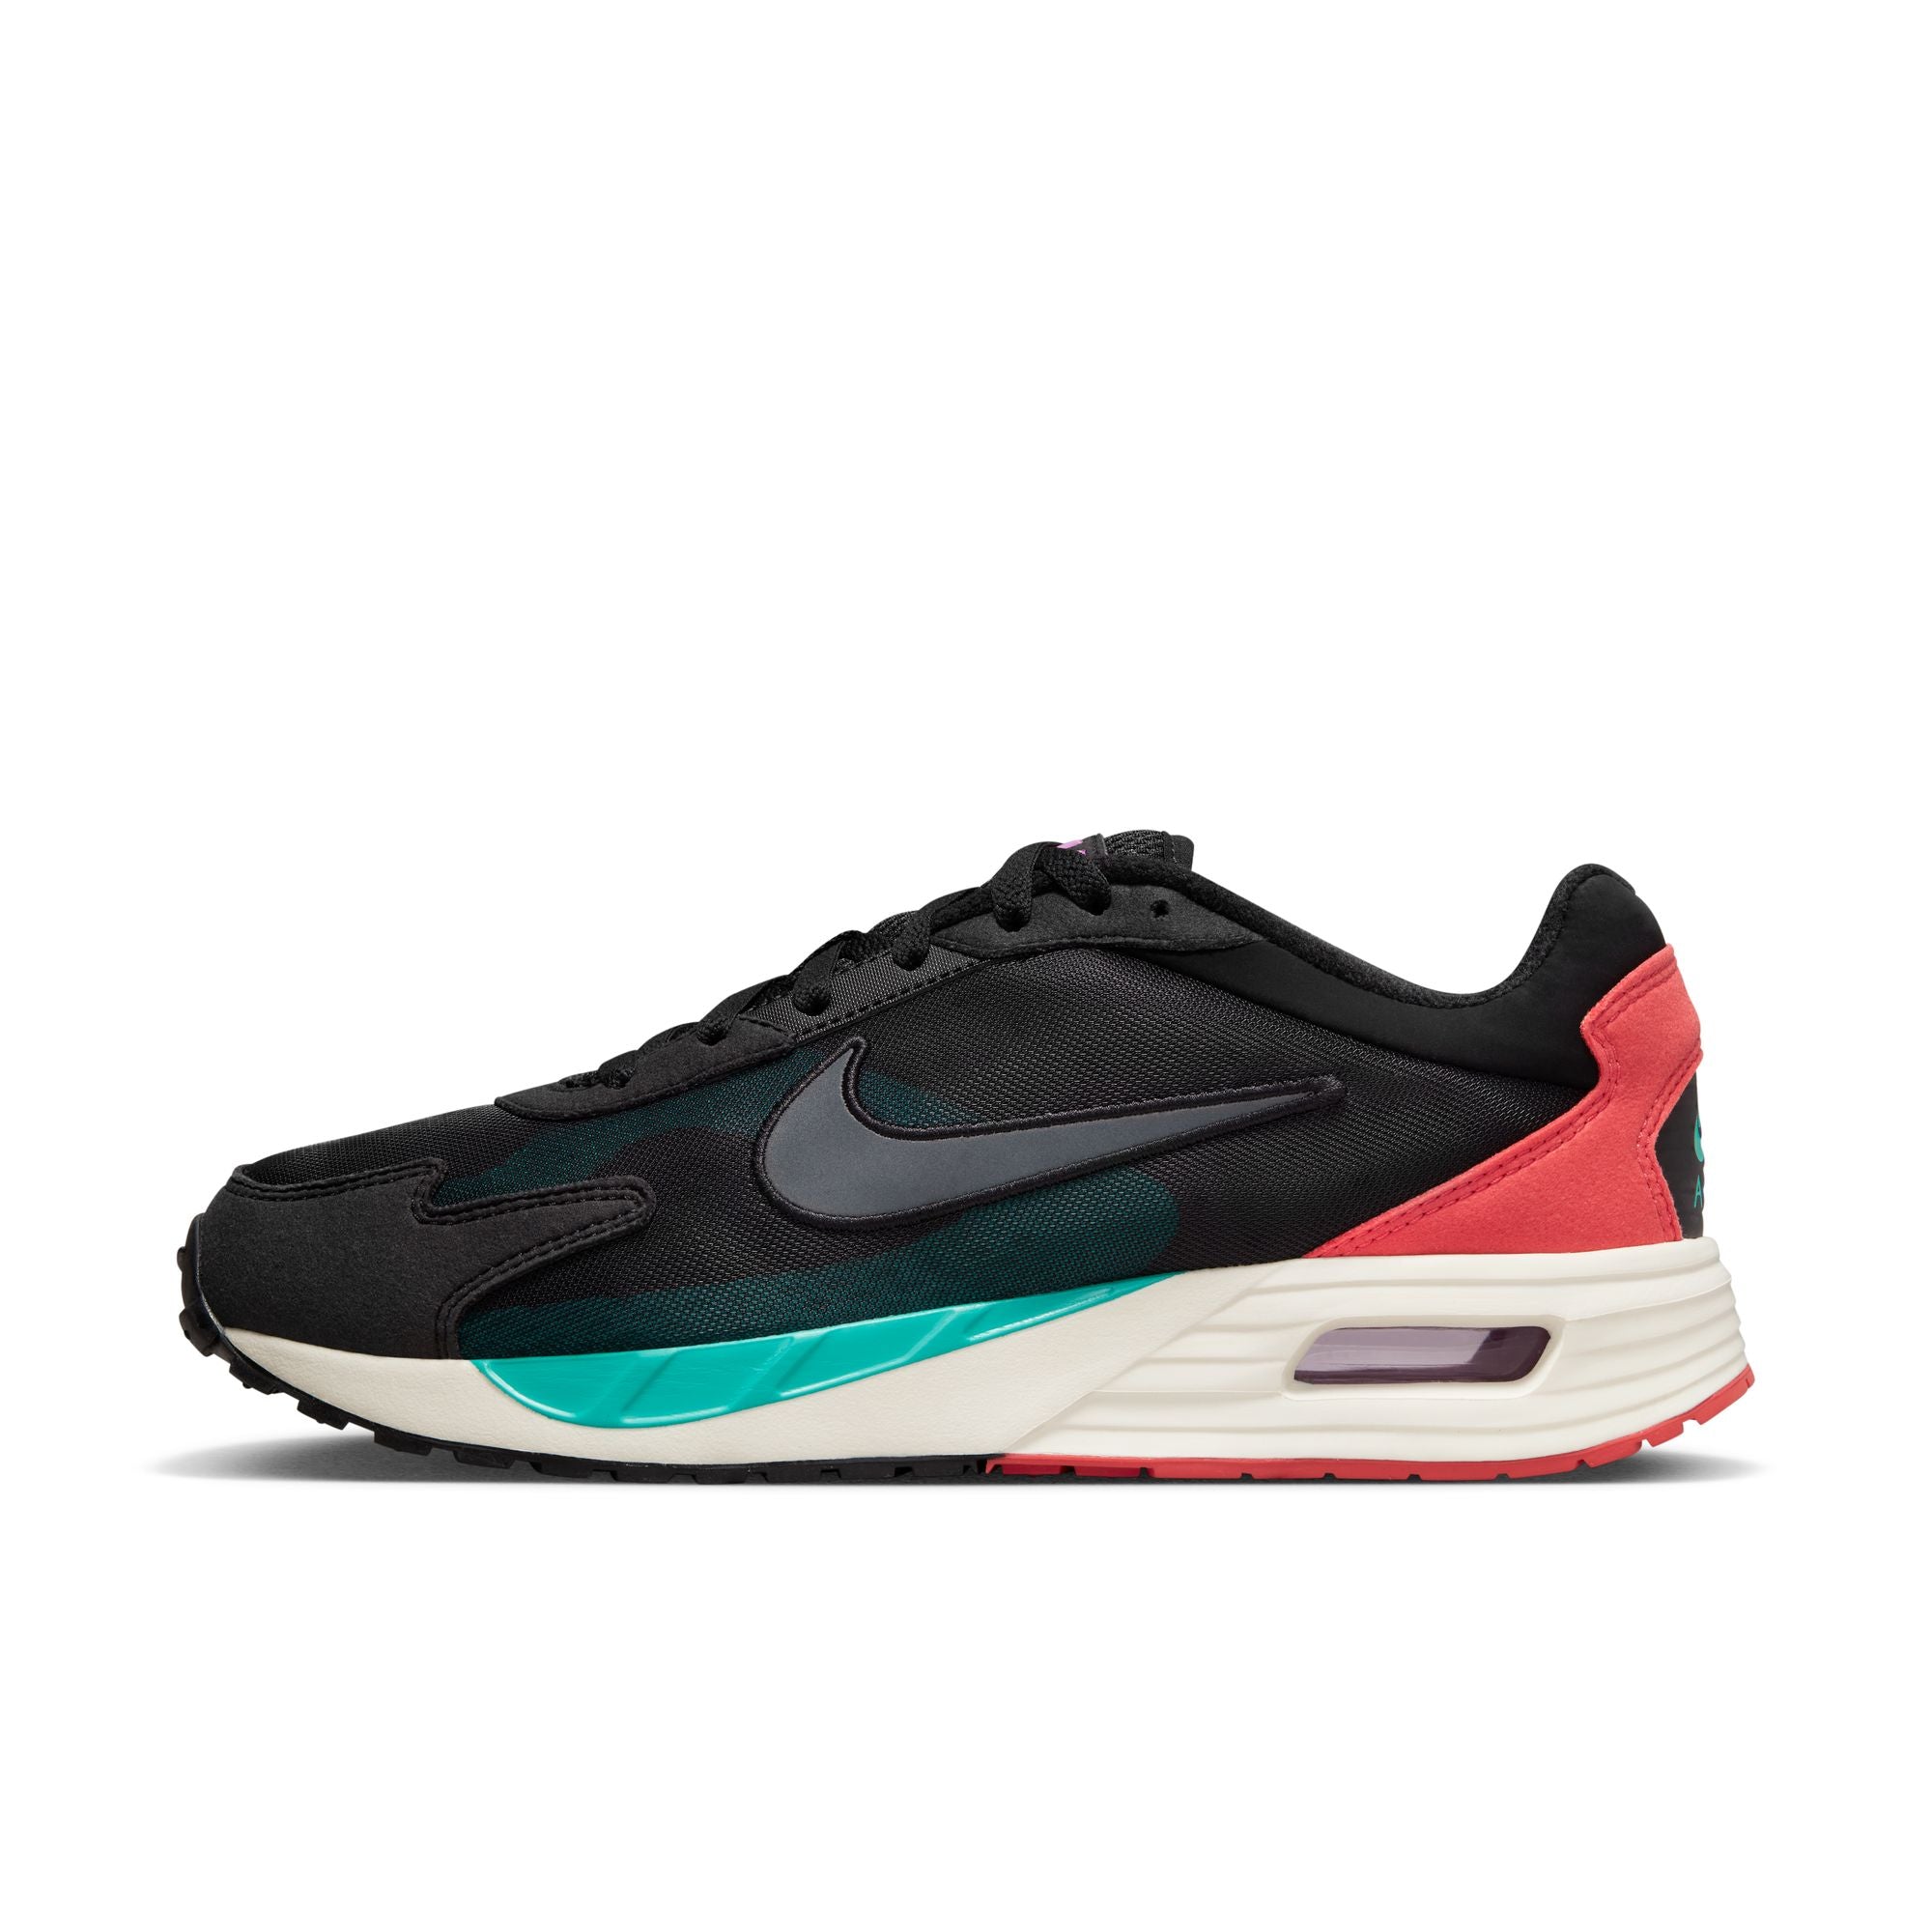 NIKE AIR MAX SOLO MEN'S SHOES